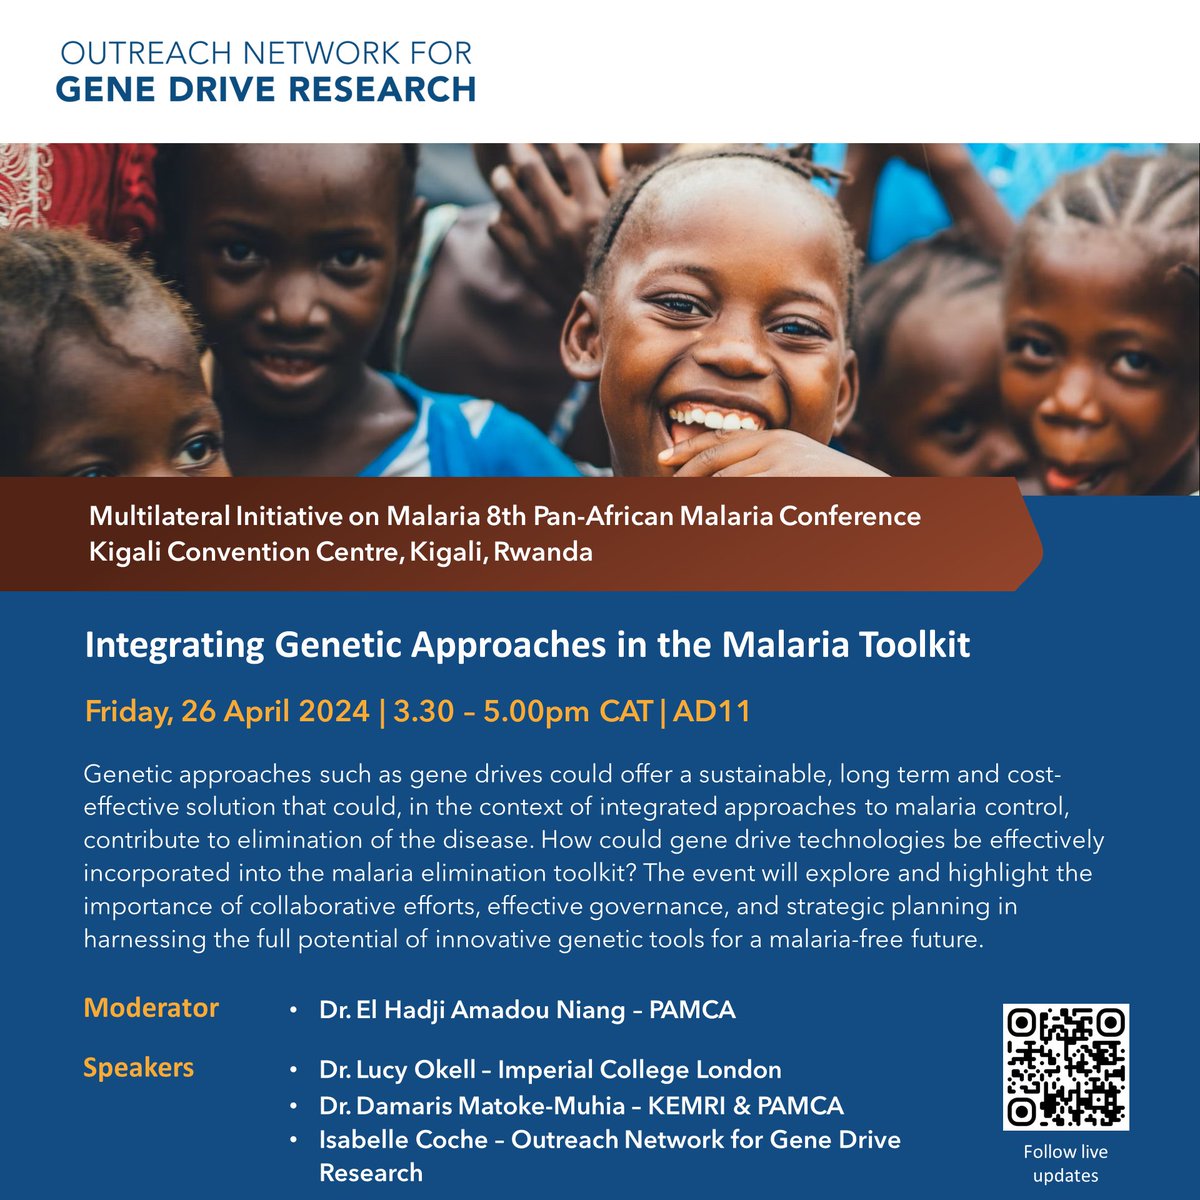 Coming to Kigali for #MIM2024? Don’t miss our panel session on Friday April 26, 3:30-5:00 PM CAT. Speakers will explore how #genedrive technologies could be integrated into #malaria control strategies and the role of different stakeholders in achieving this. ⬇️…